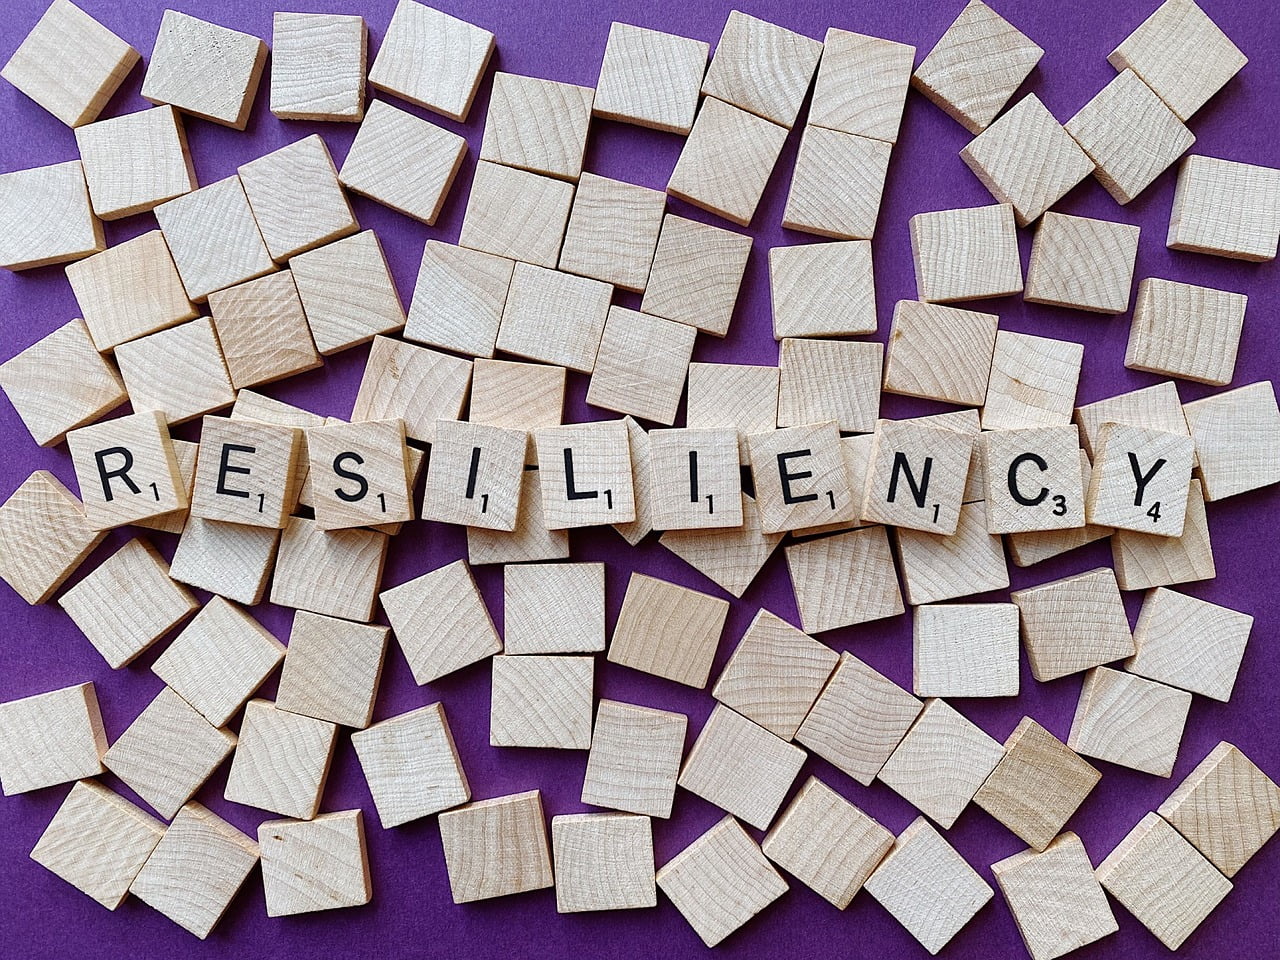 resilient, resiliency, resilience-4899283.jpg